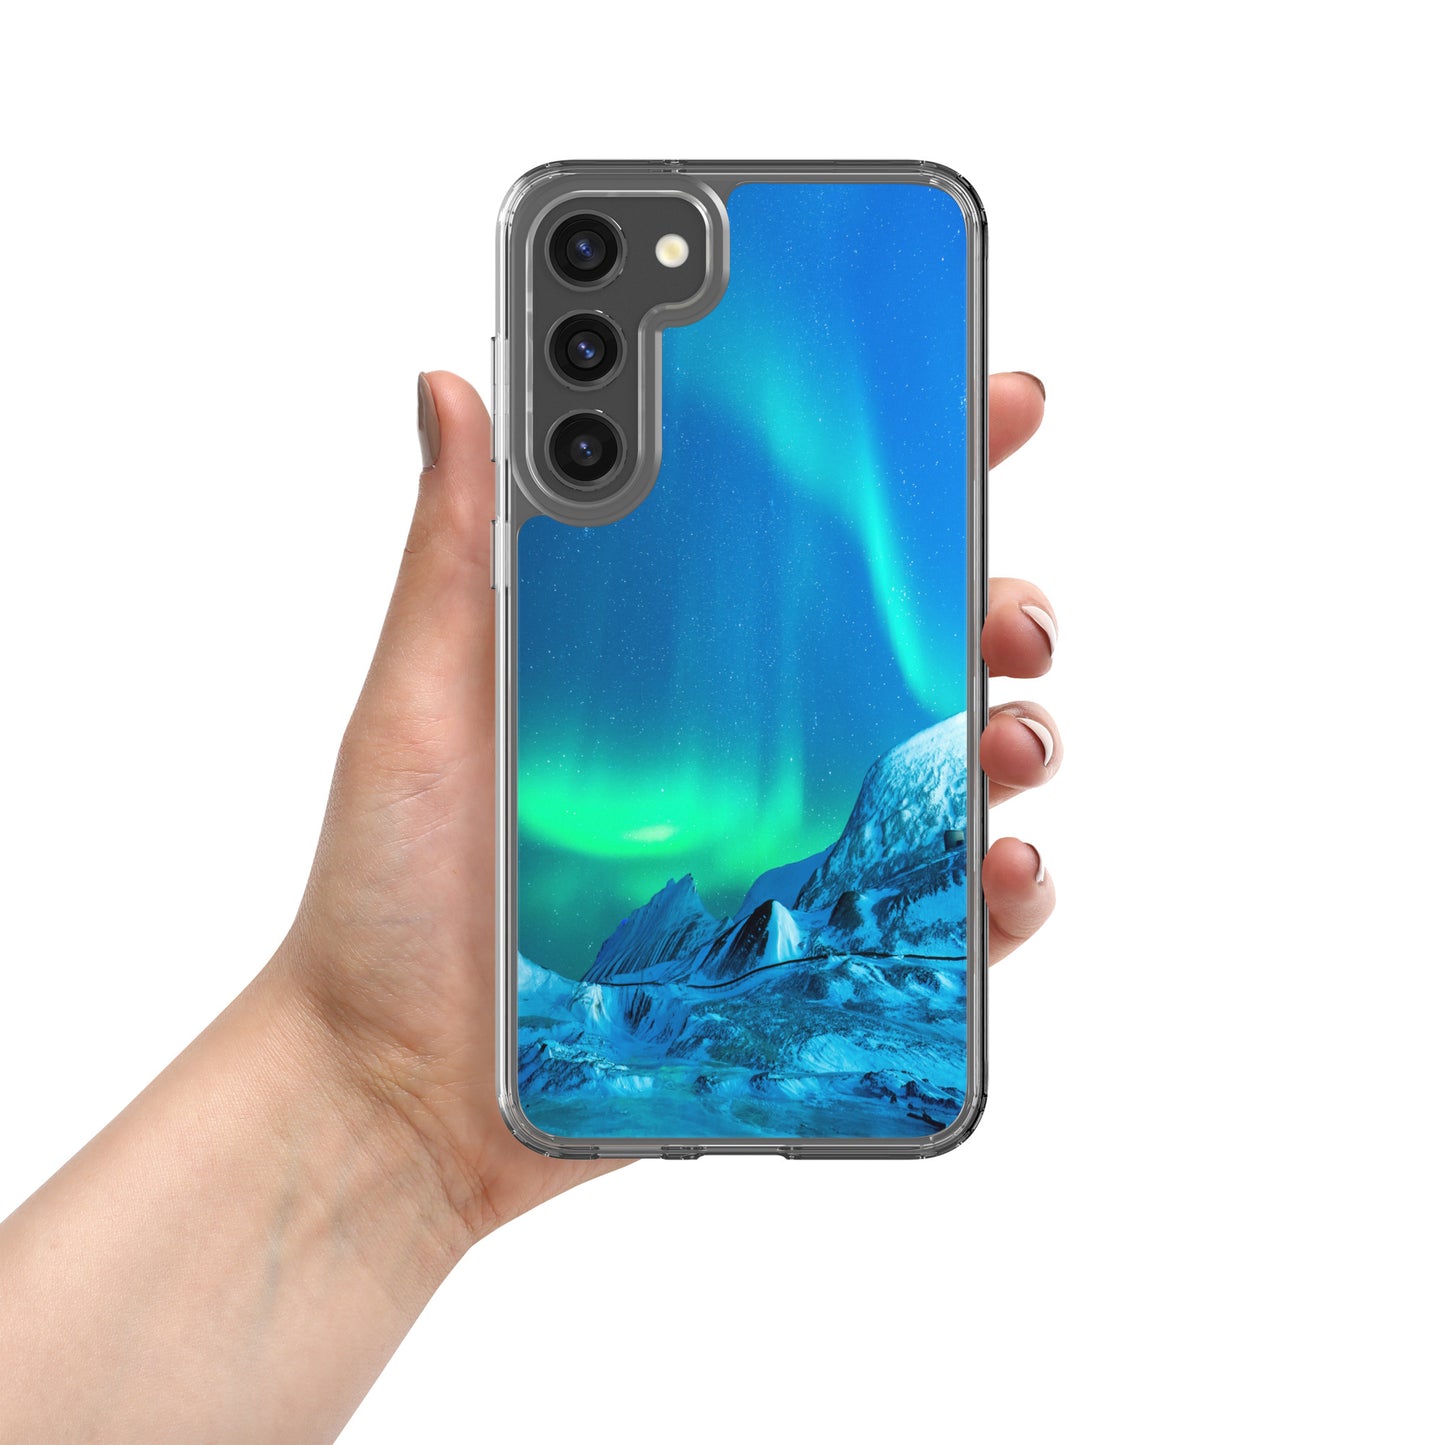 Unique Aurora Borealis Samsung Cover Case - Northern Light Phone Cover Case - Clear Case for Samsung Galaxy - Perfect Aurora Lovers Gift 3